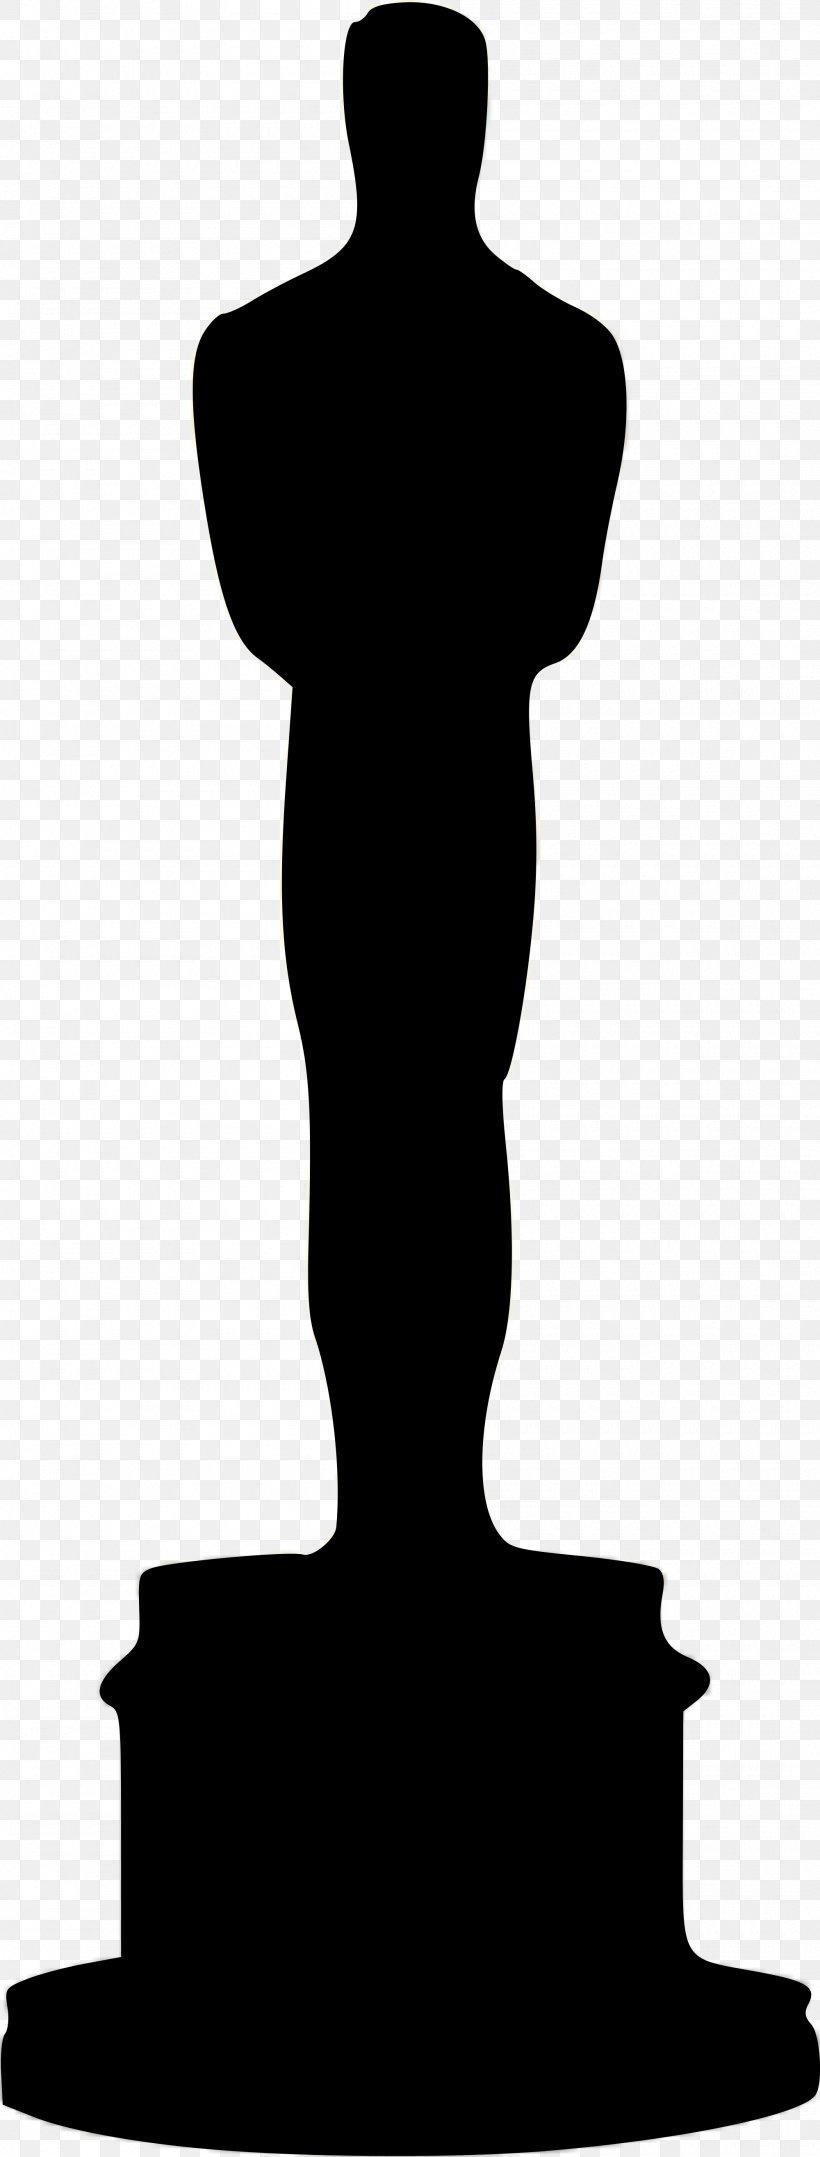 90th Academy Awards Silhouette Clip Art, PNG, 2000x5262px, 90th Academy Awards, Academy Award For Best Actor, Academy Awards, Artwork, Award Download Free